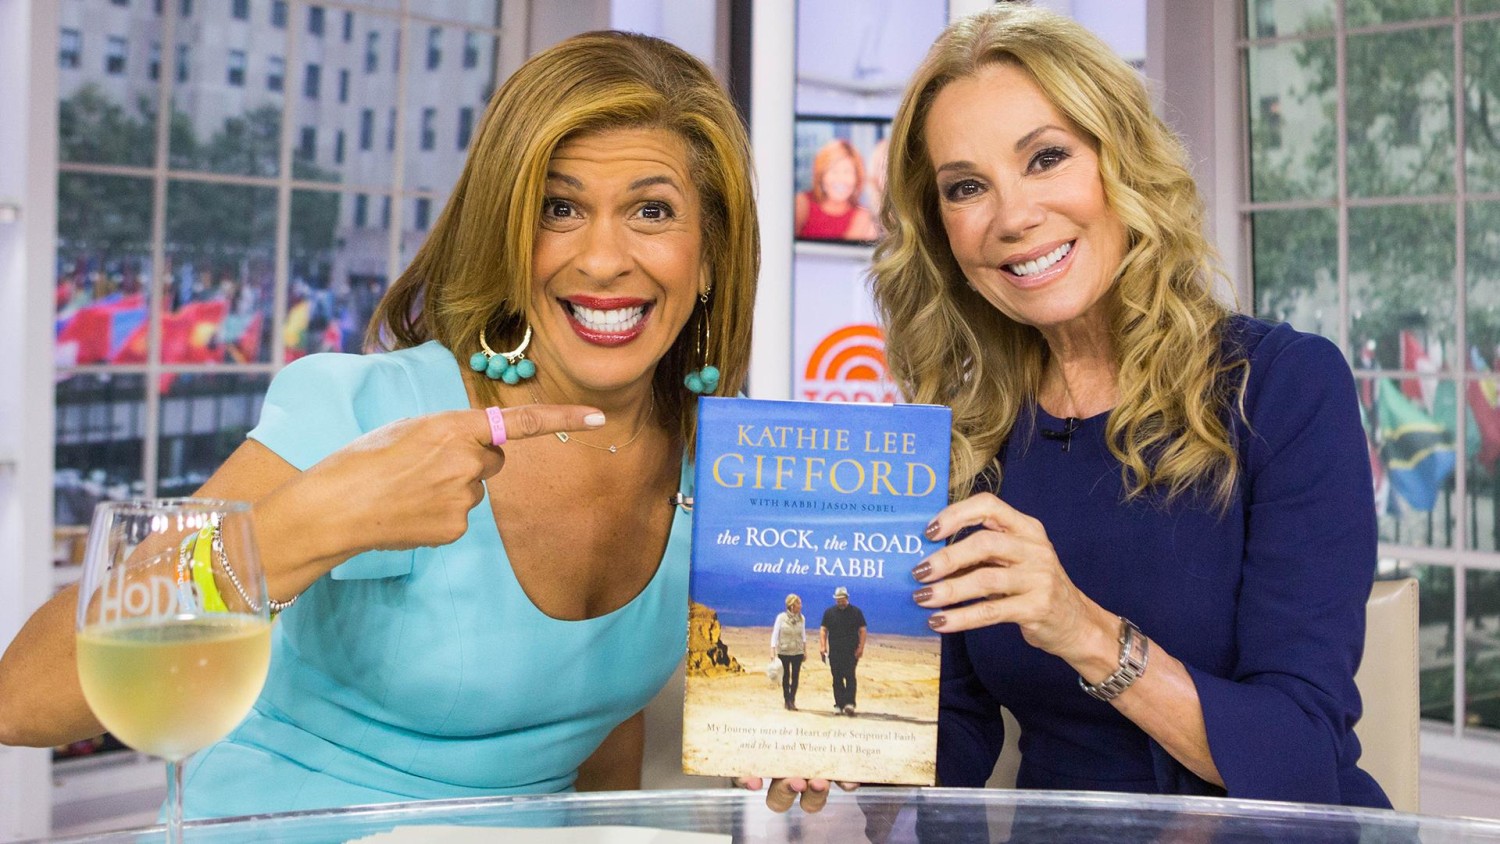 Kathie Lee Gifford announces her new book about Israel